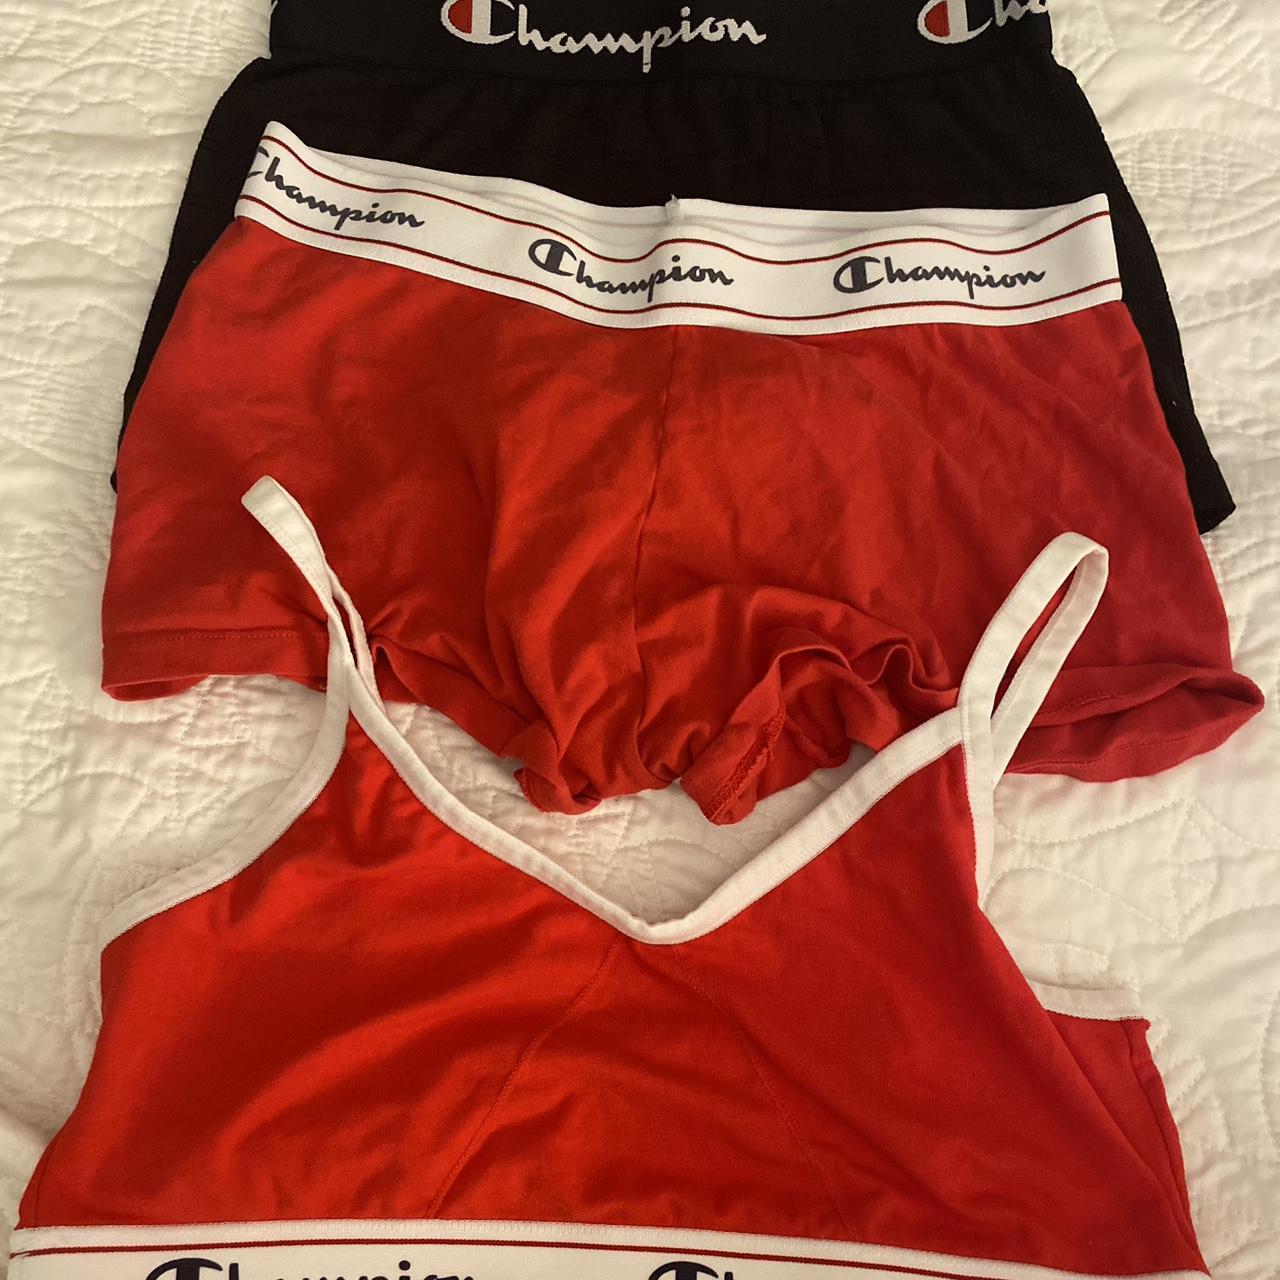 Build a bear underwear including red pants and white - Depop